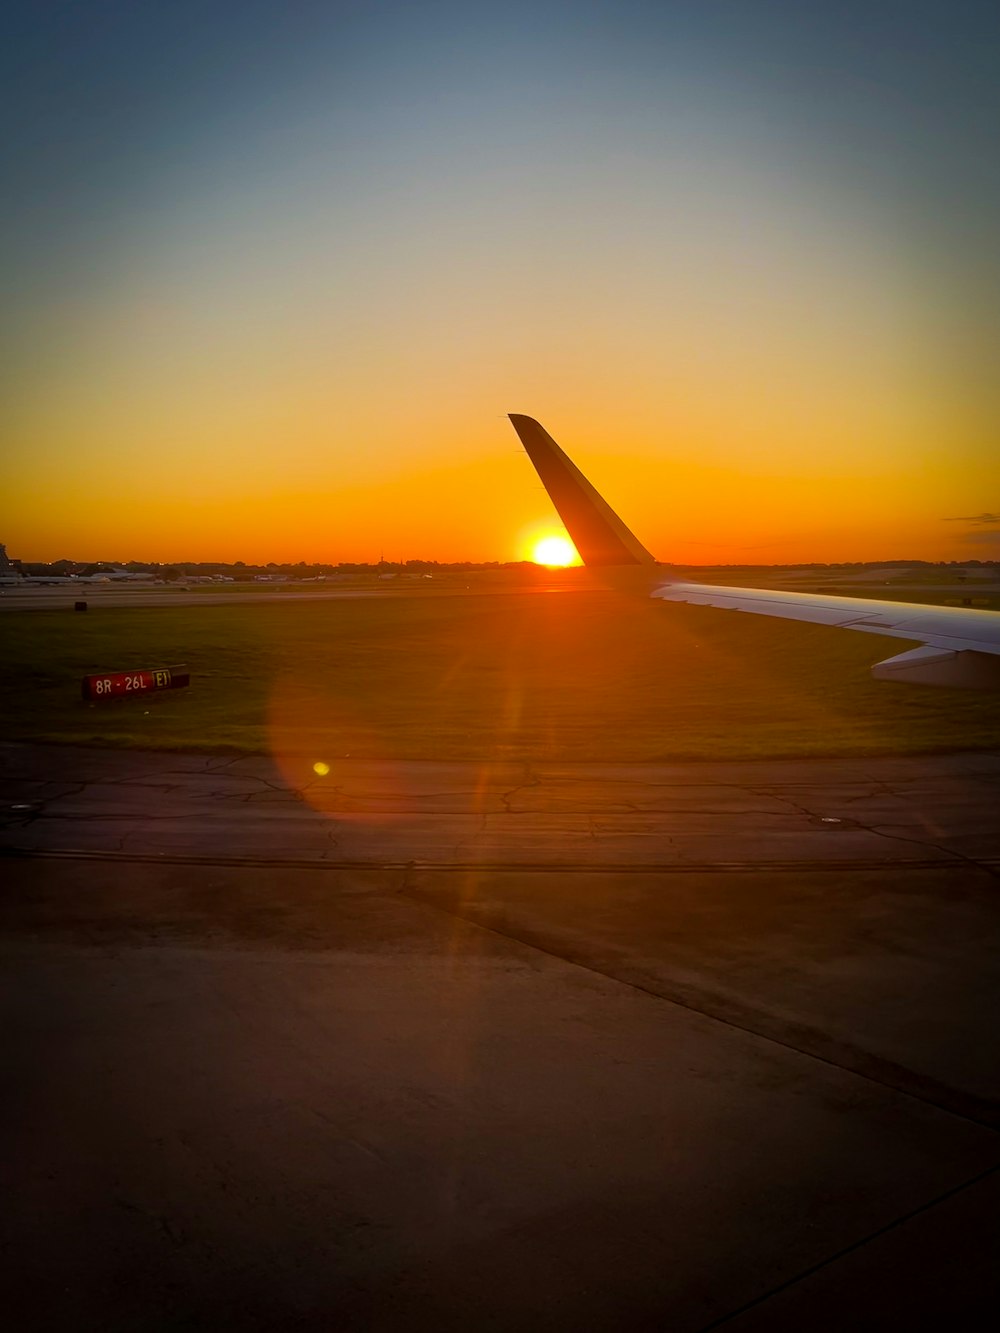 the sun is setting over the wing of an airplane